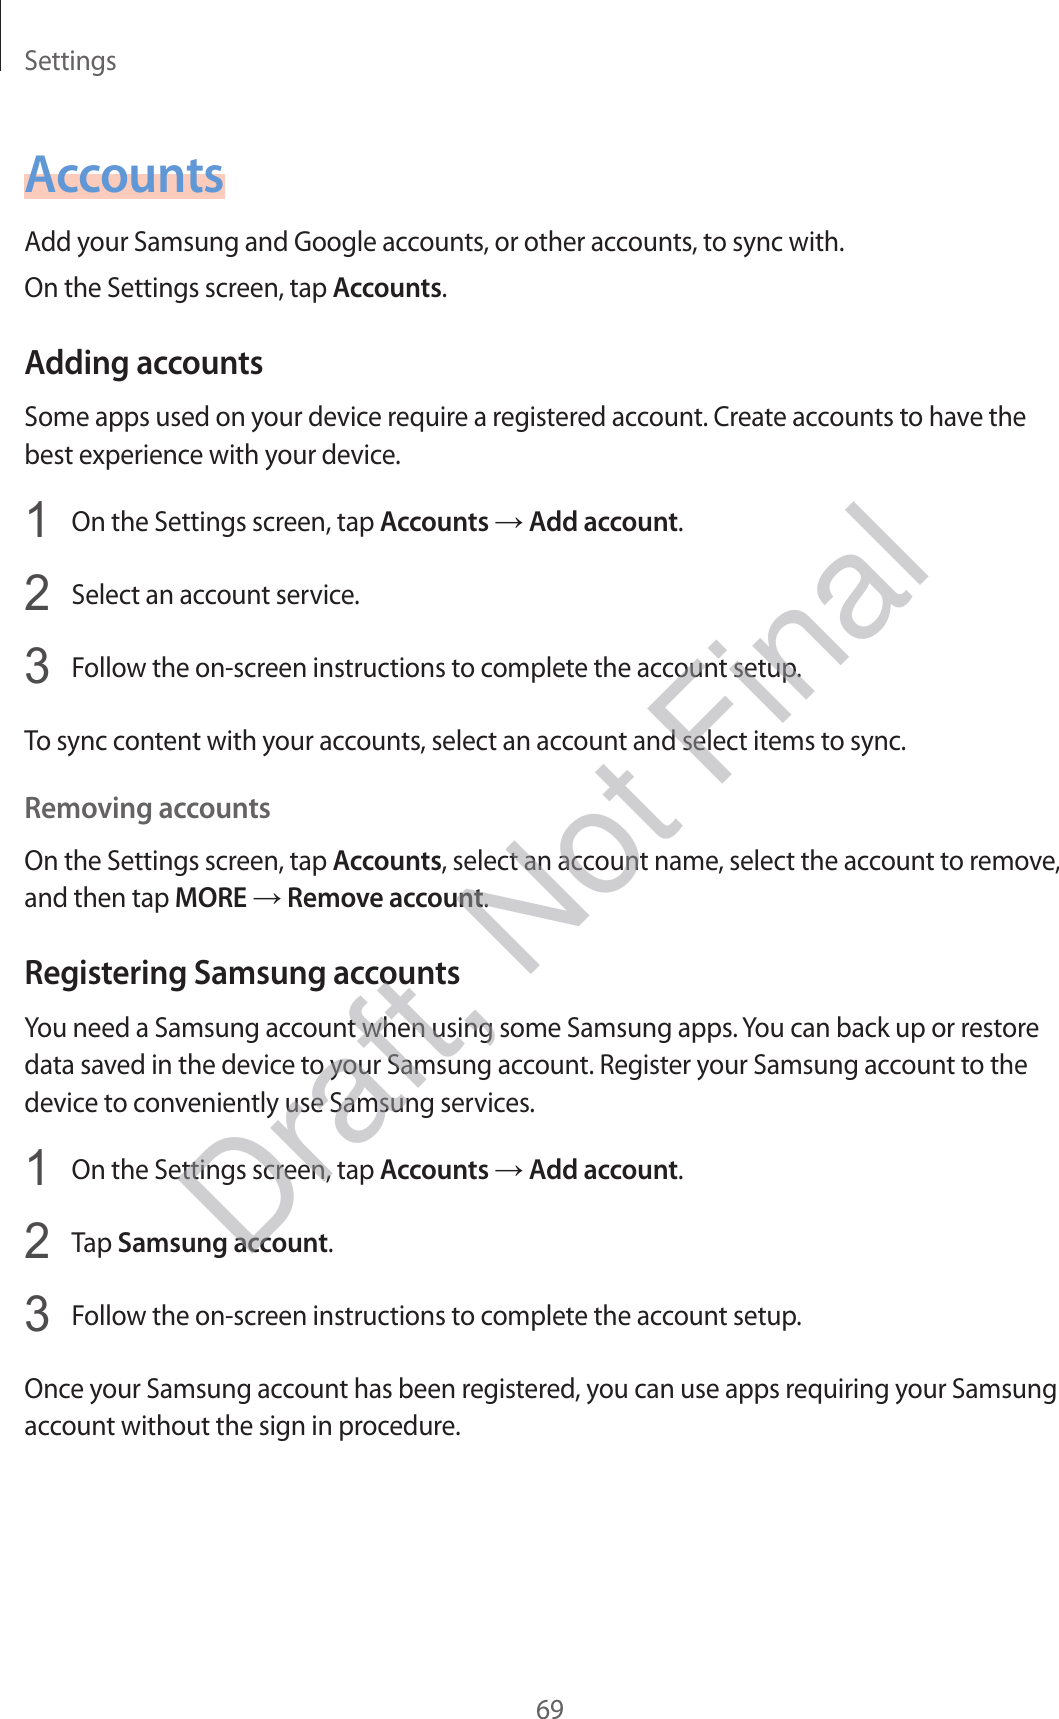 Settings69AccountsAdd your Samsung and Google accounts, or other accounts, to sync with.On the Settings screen, tap Accounts.Adding accountsSome apps used on your device require a registered account. Create accounts to have the best experience with your device.1  On the Settings screen, tap Accounts → Add account.2  Select an account service.3  Follow the on-screen instructions to complete the account setup.To sync content with your accounts, select an account and select items to sync.Removing accountsOn the Settings screen, tap Accounts, select an account name, select the account to remove, and then tap MORE → Remove account.Registering Samsung accountsYou need a Samsung account when using some Samsung apps. You can back up or restore data saved in the device to your Samsung account. Register your Samsung account to the device to conveniently use Samsung services.1  On the Settings screen, tap Accounts → Add account.2  Tap Samsung account.3  Follow the on-screen instructions to complete the account setup.Once your Samsung account has been registered, you can use apps requiring your Samsung account without the sign in procedure.Draft, Not Final